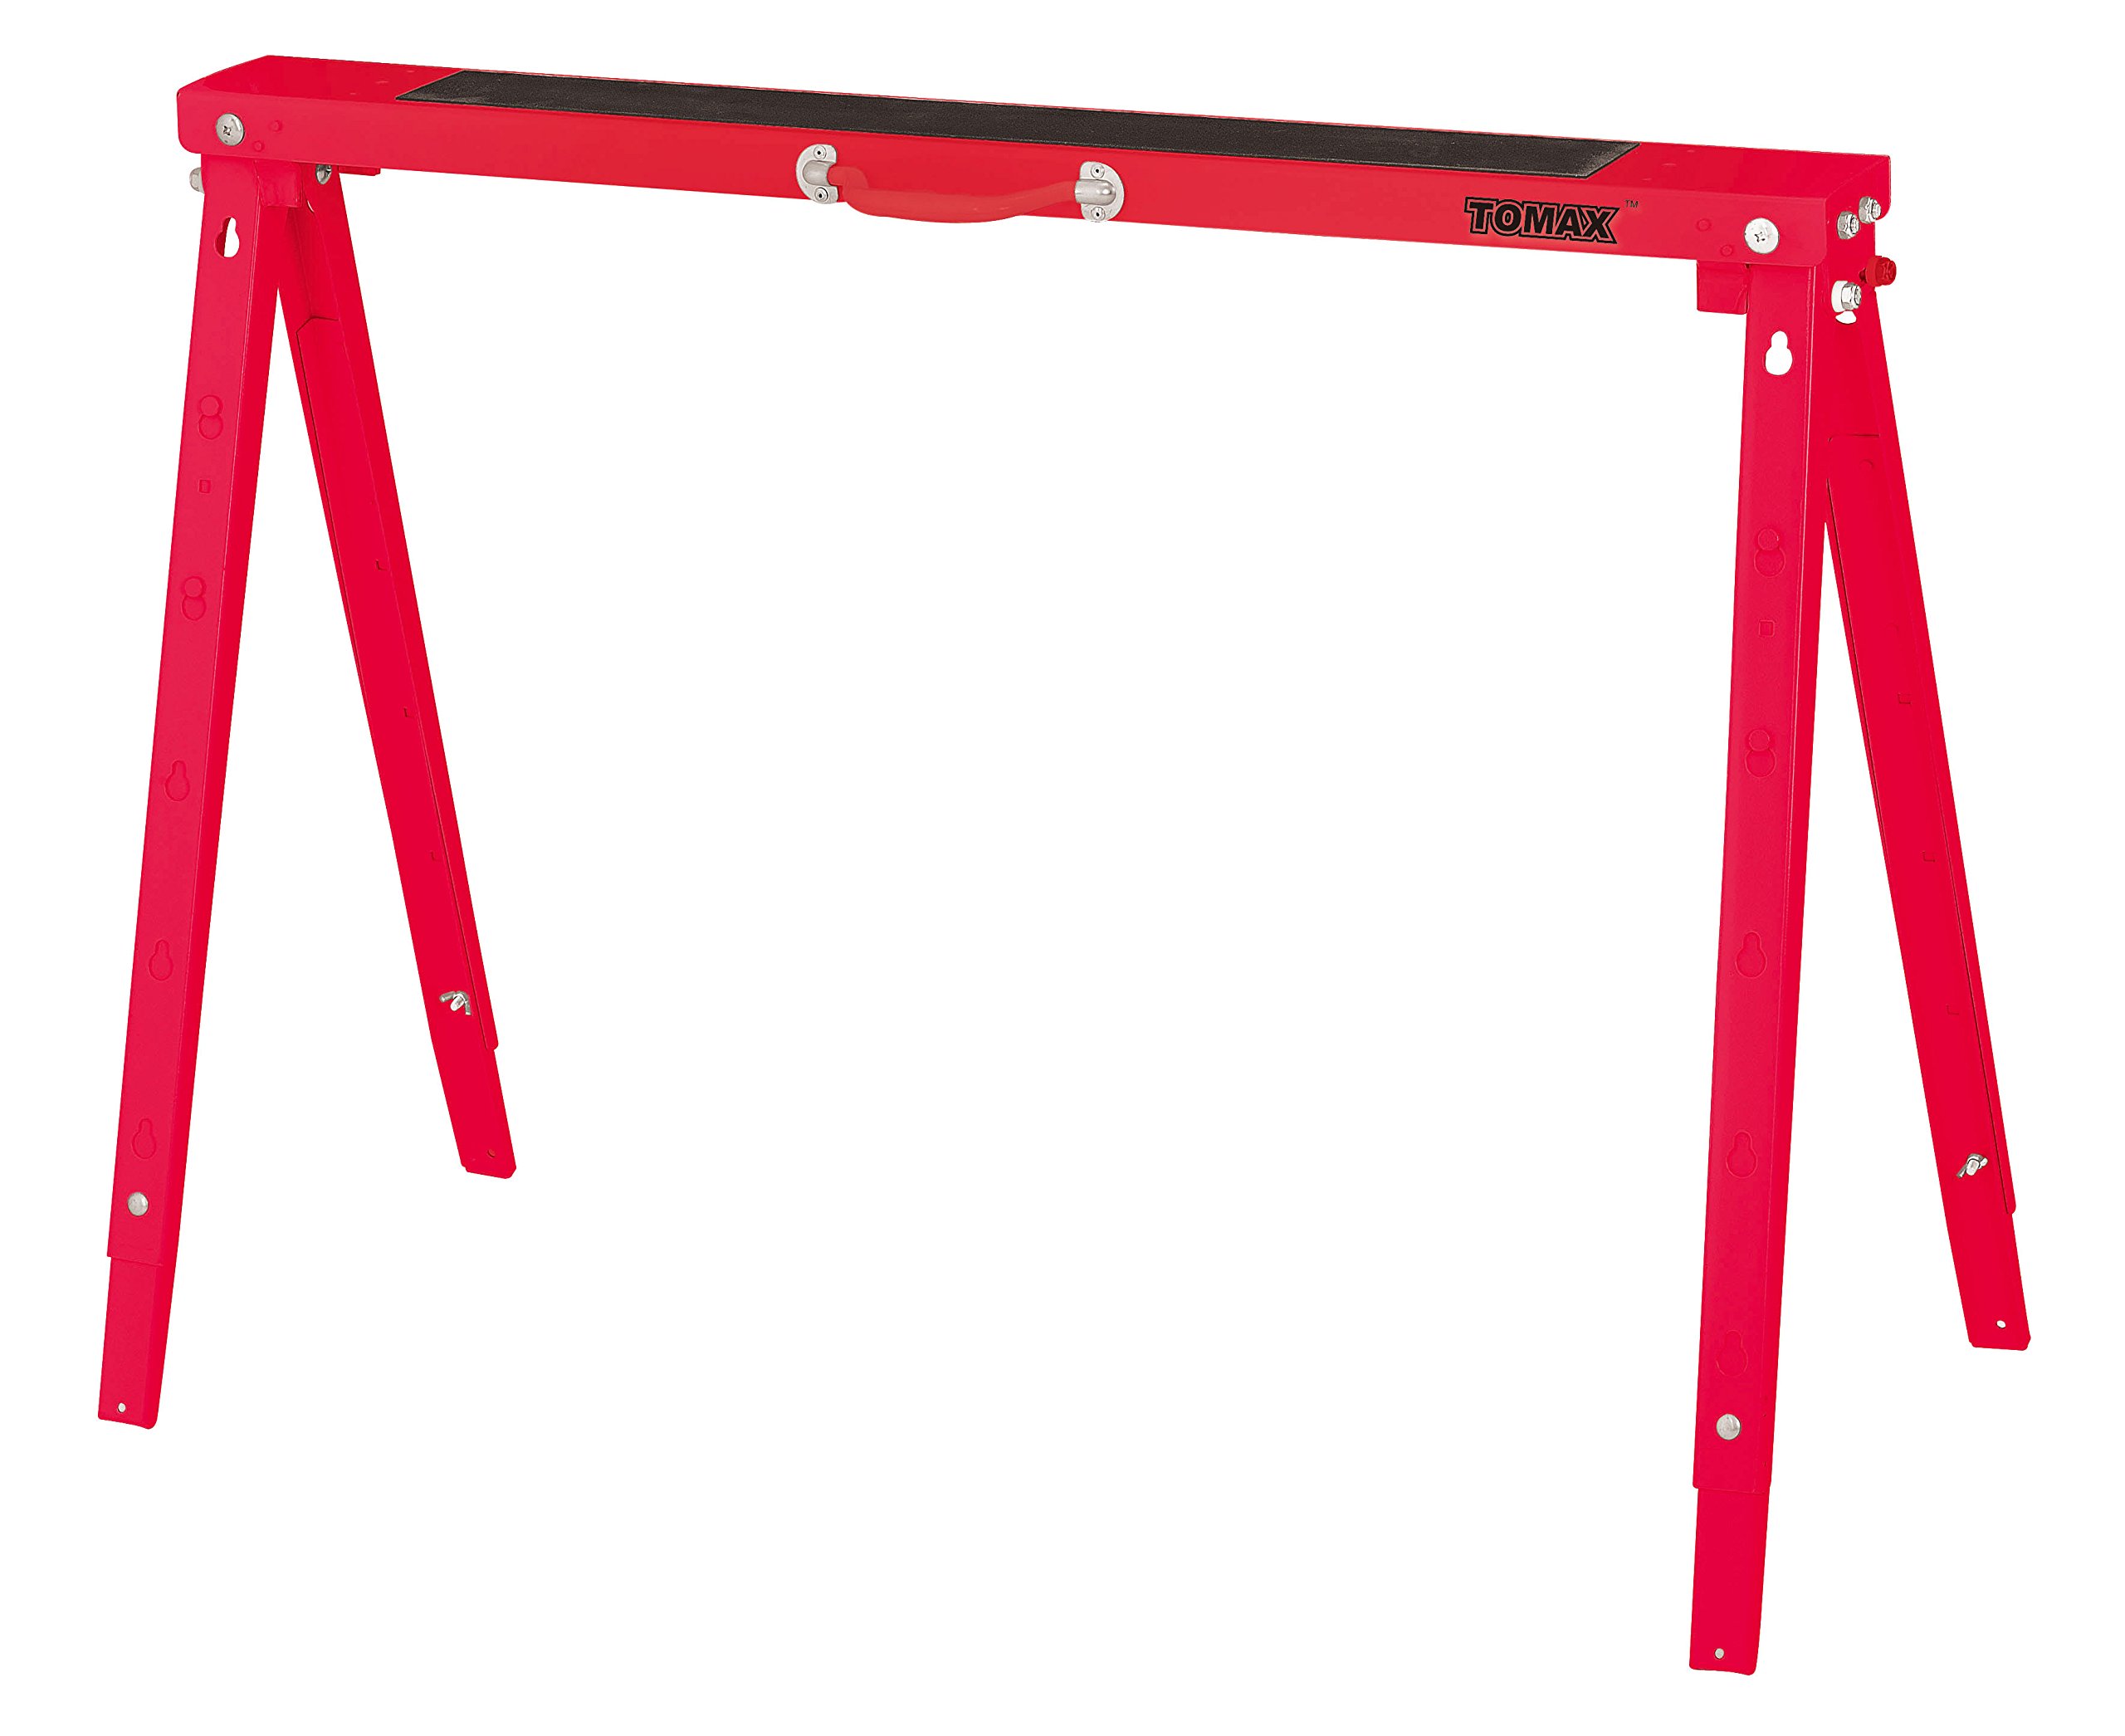 TOMAX Folding Sawhorse Height Adjustable 440lb Weight Capacity Single Pack